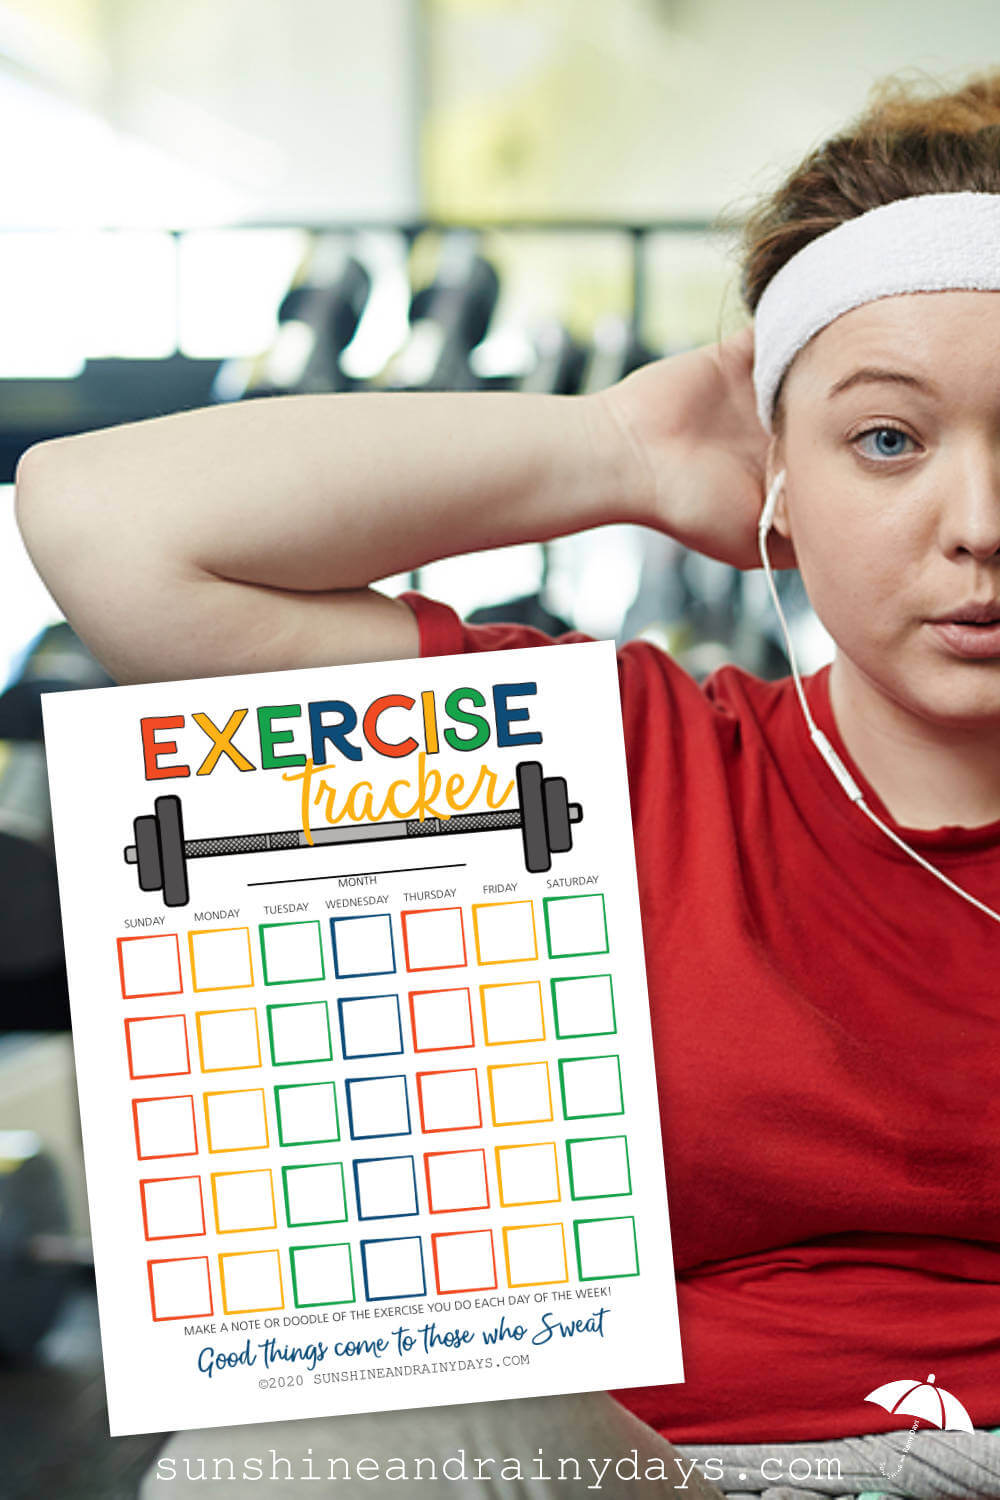 A gym rat's workout etiquette guide: All your awkward questions answered